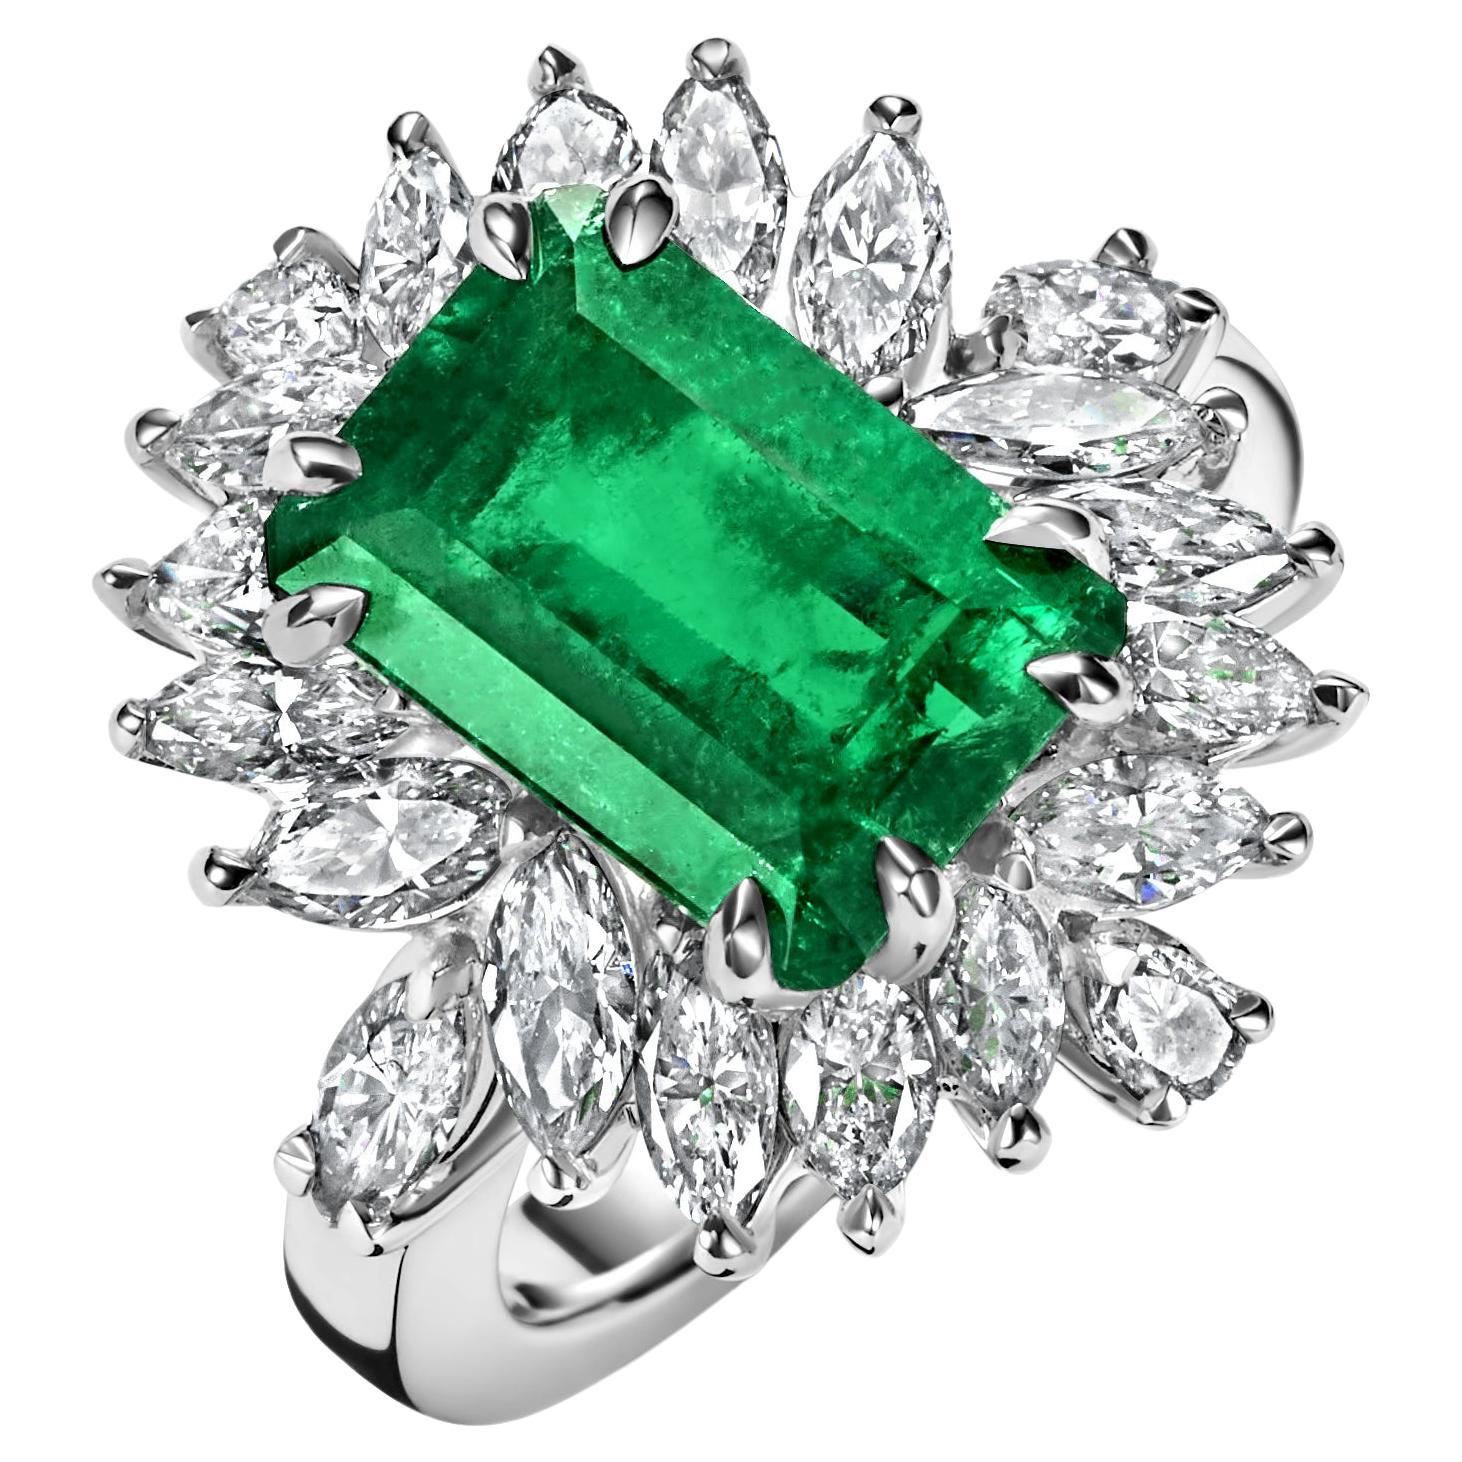 Beautiful 18kt Handmade White Gold Ring4.36 Ct Colombia Emerald Minor&Diamonds For Sale